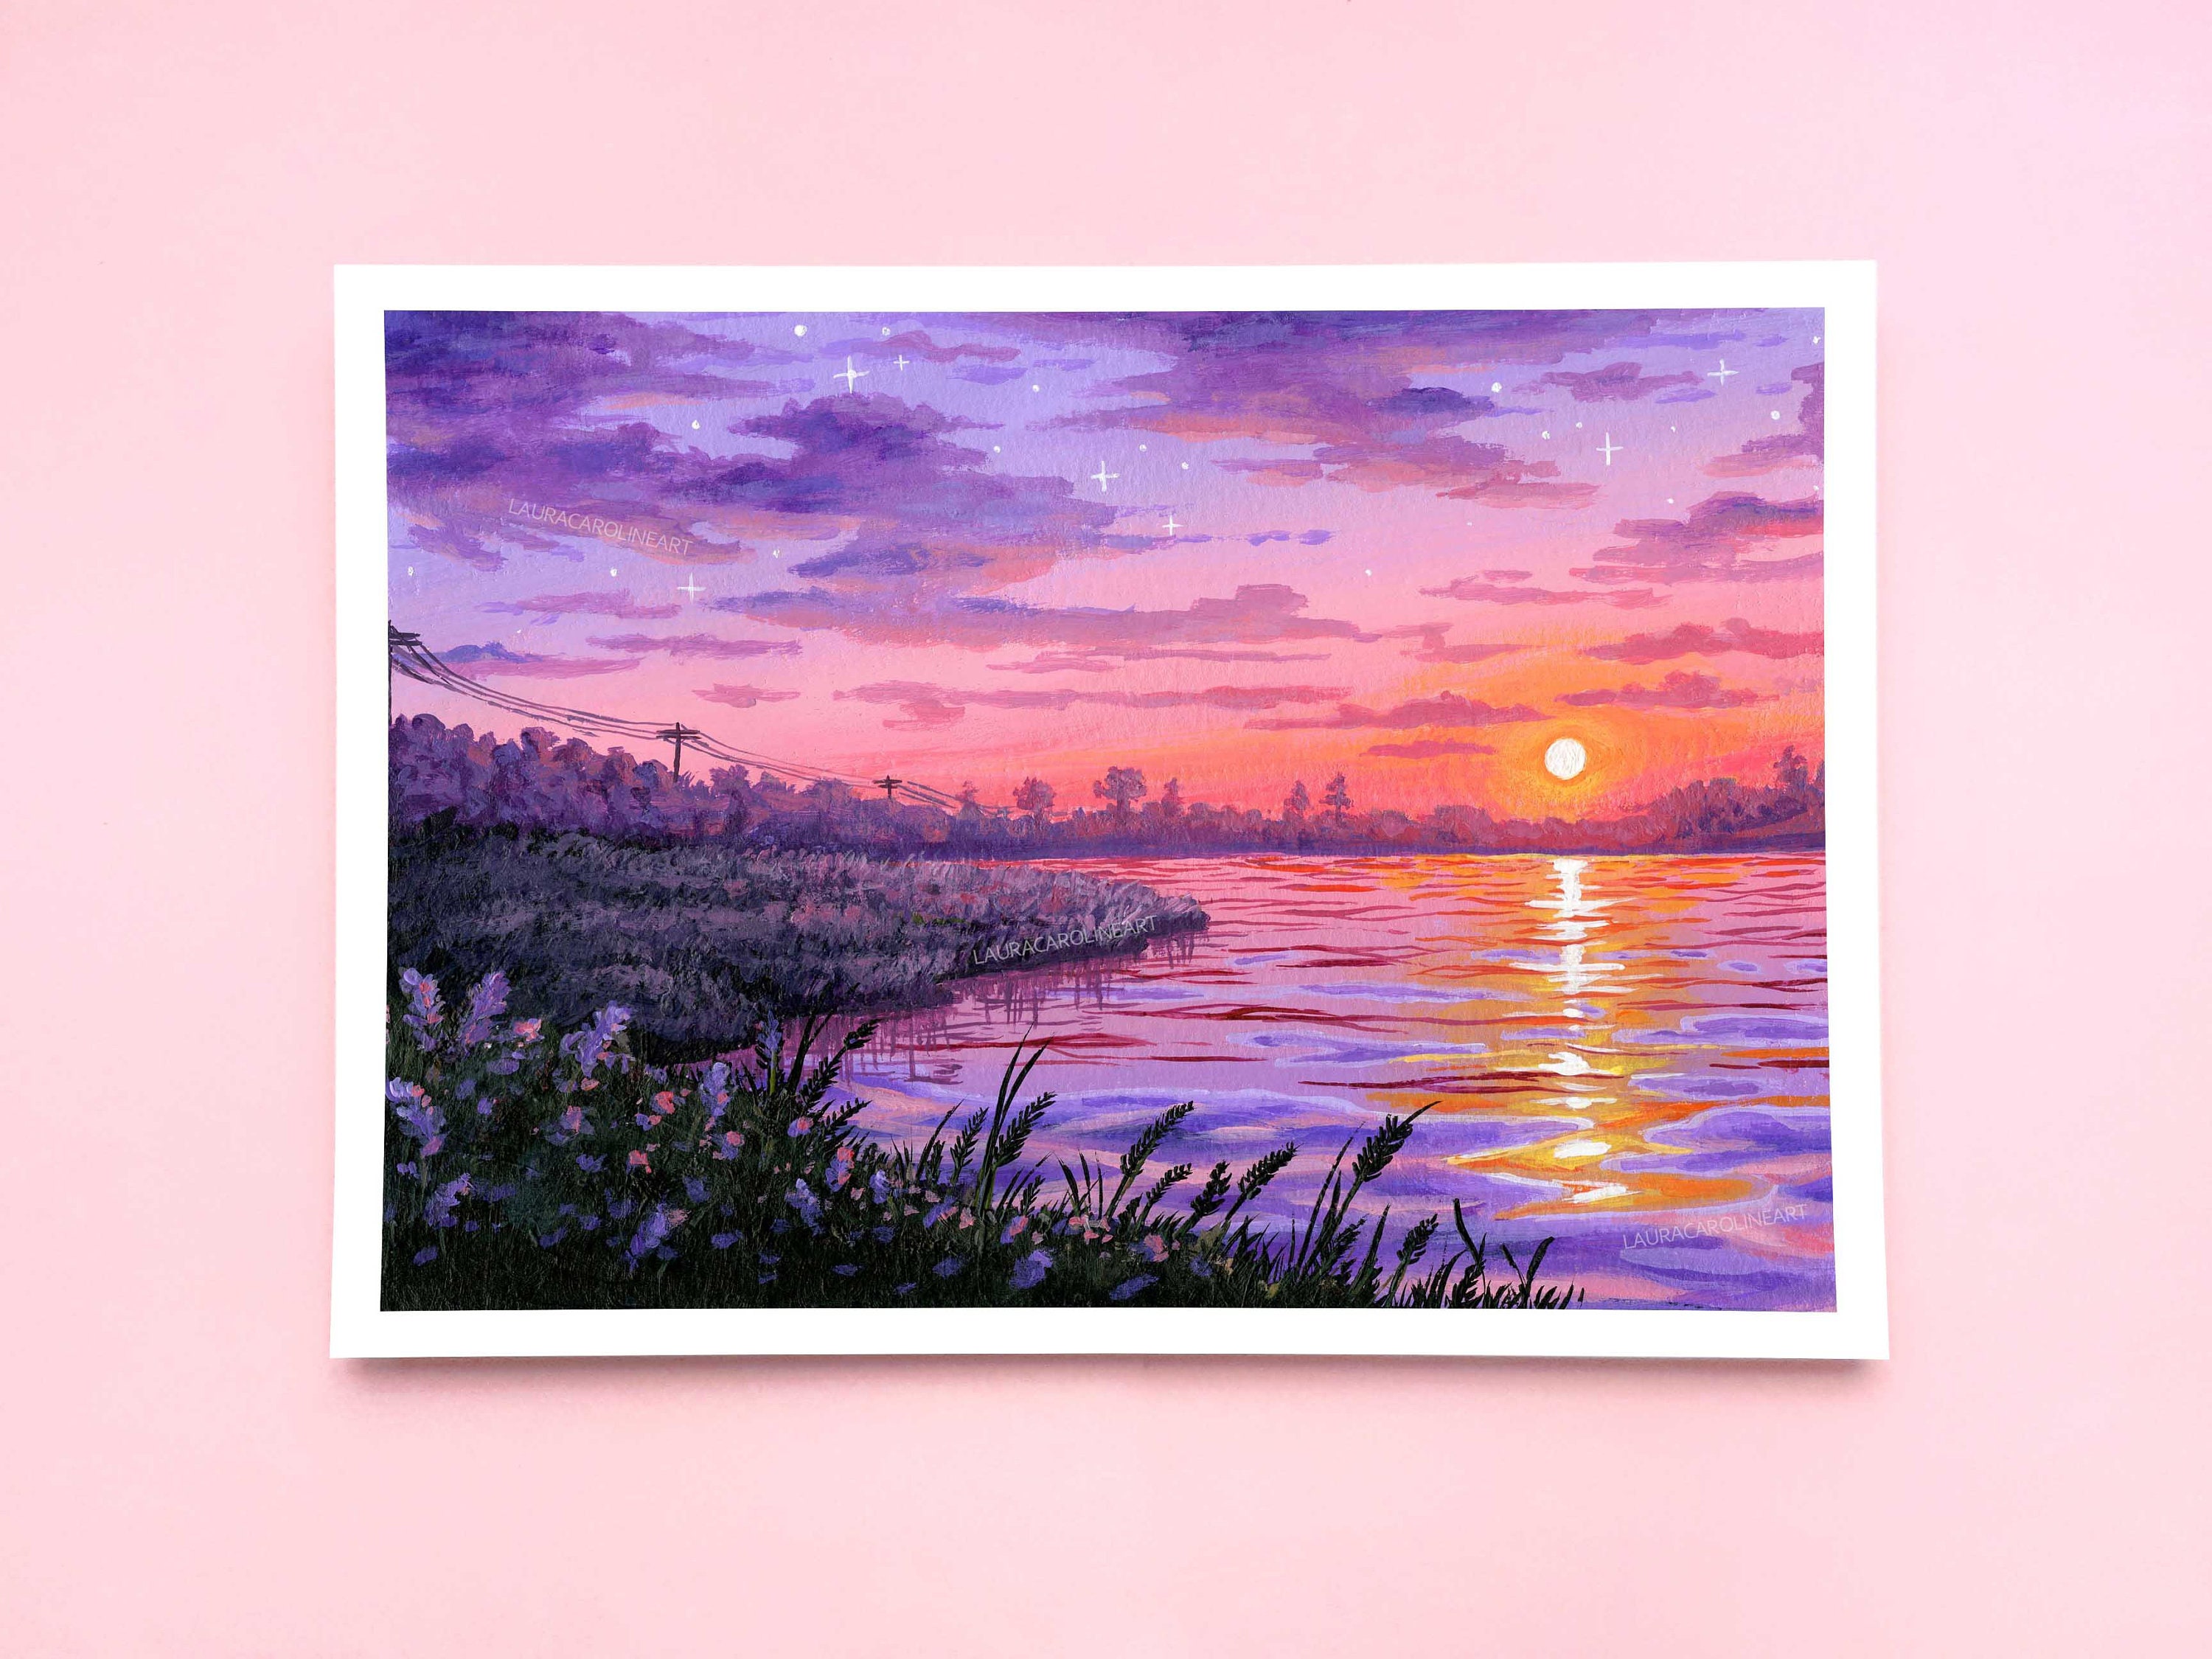 LARGE PLUM PURPLE SUNSET SEA SEASCAPE CANVAS PICTURE 34"x20" mounted ready2hang 